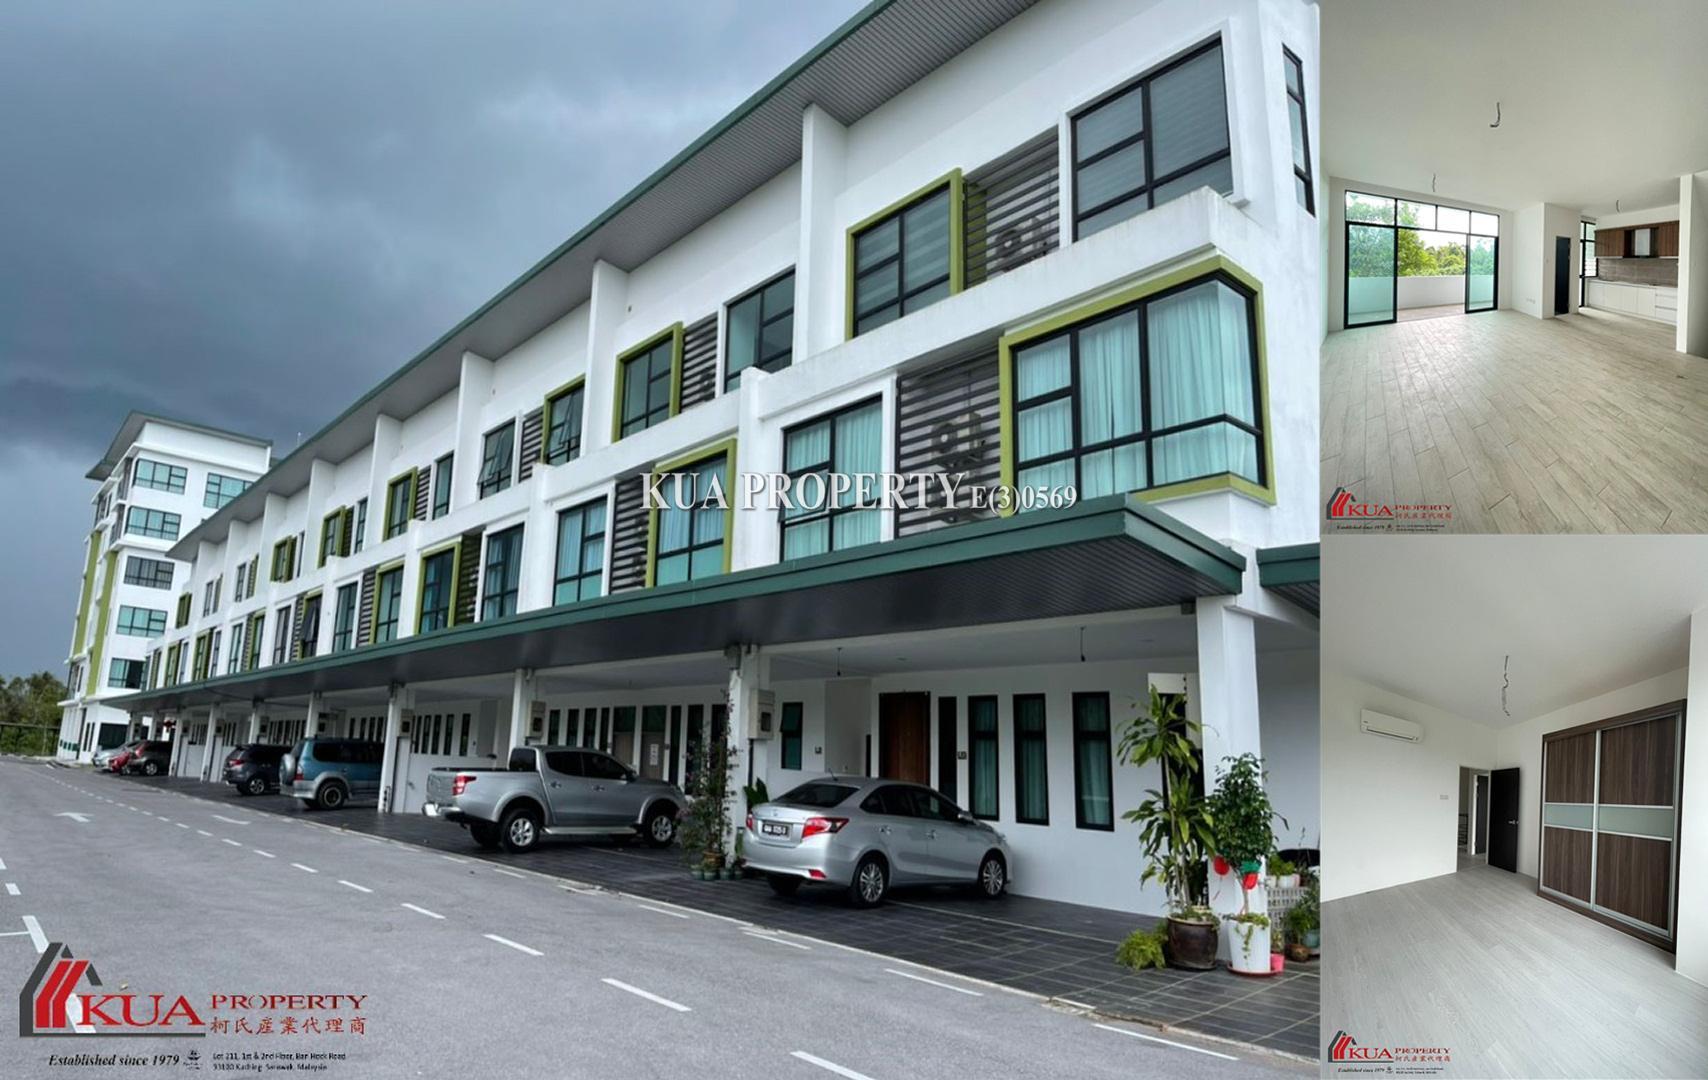 Forest Hill Upper Unit Townhouse For Sale!at Sungai Maong, Kuching